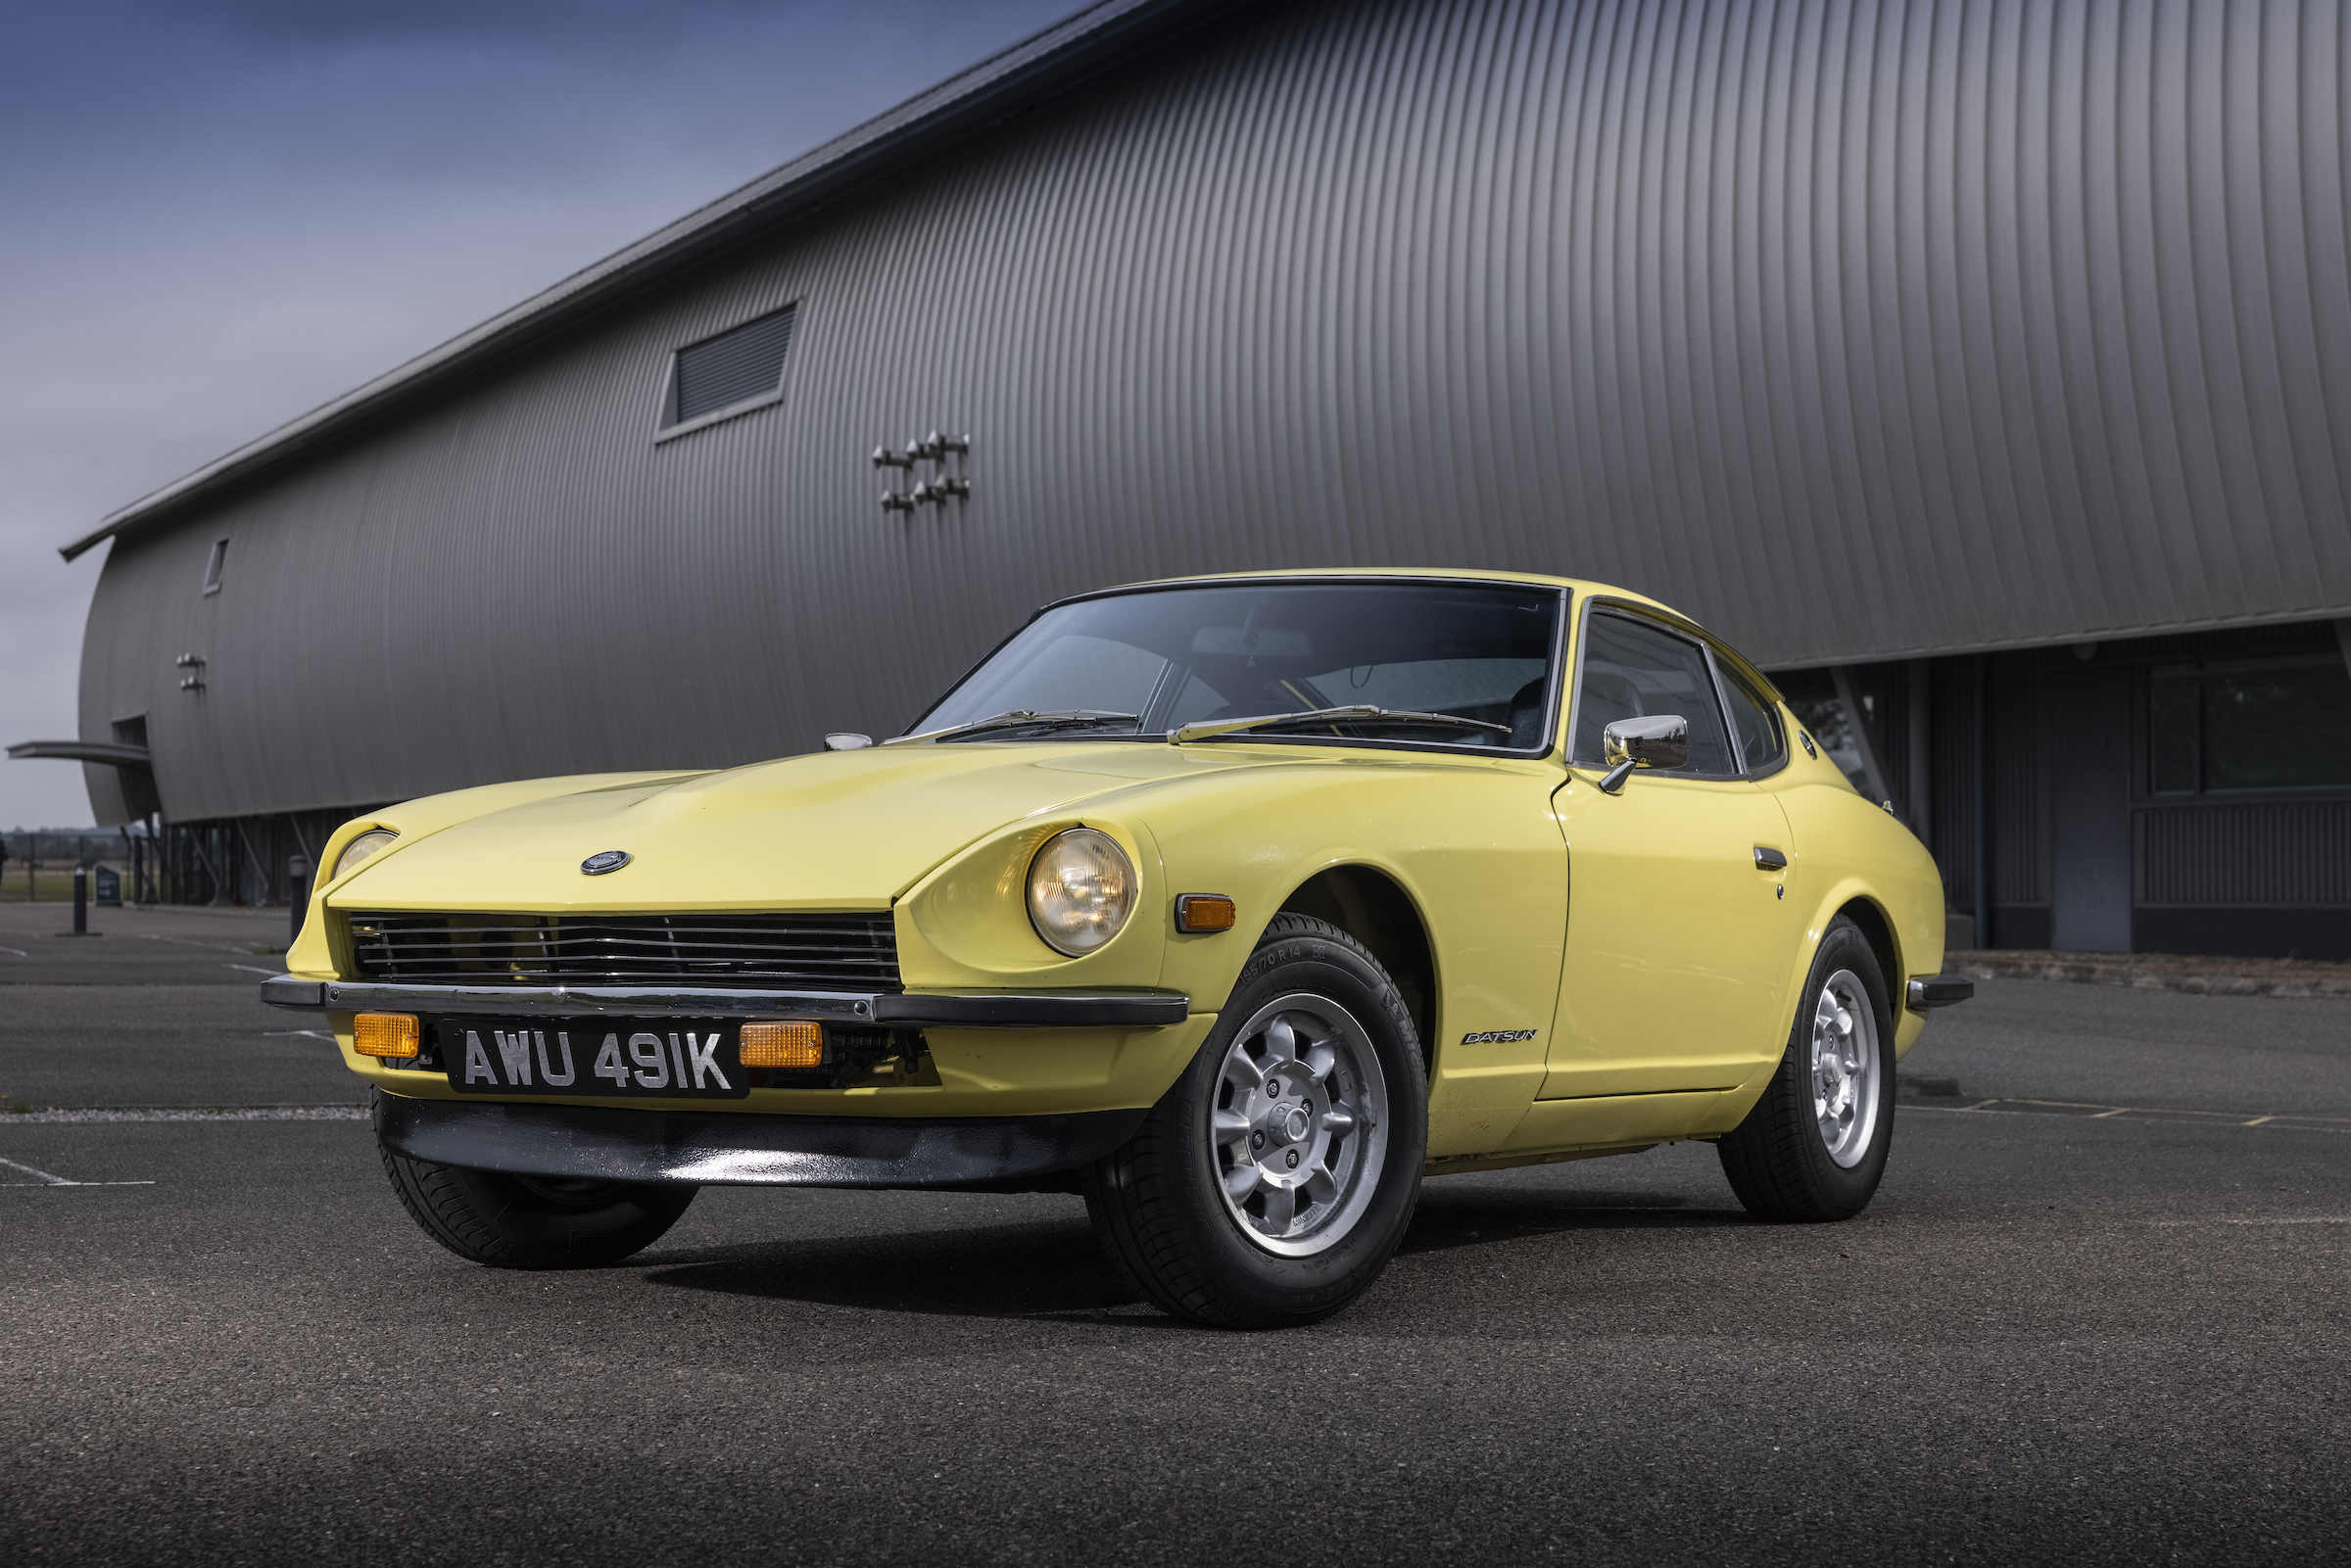 Datsun 240Z review: Is the original Z the best?